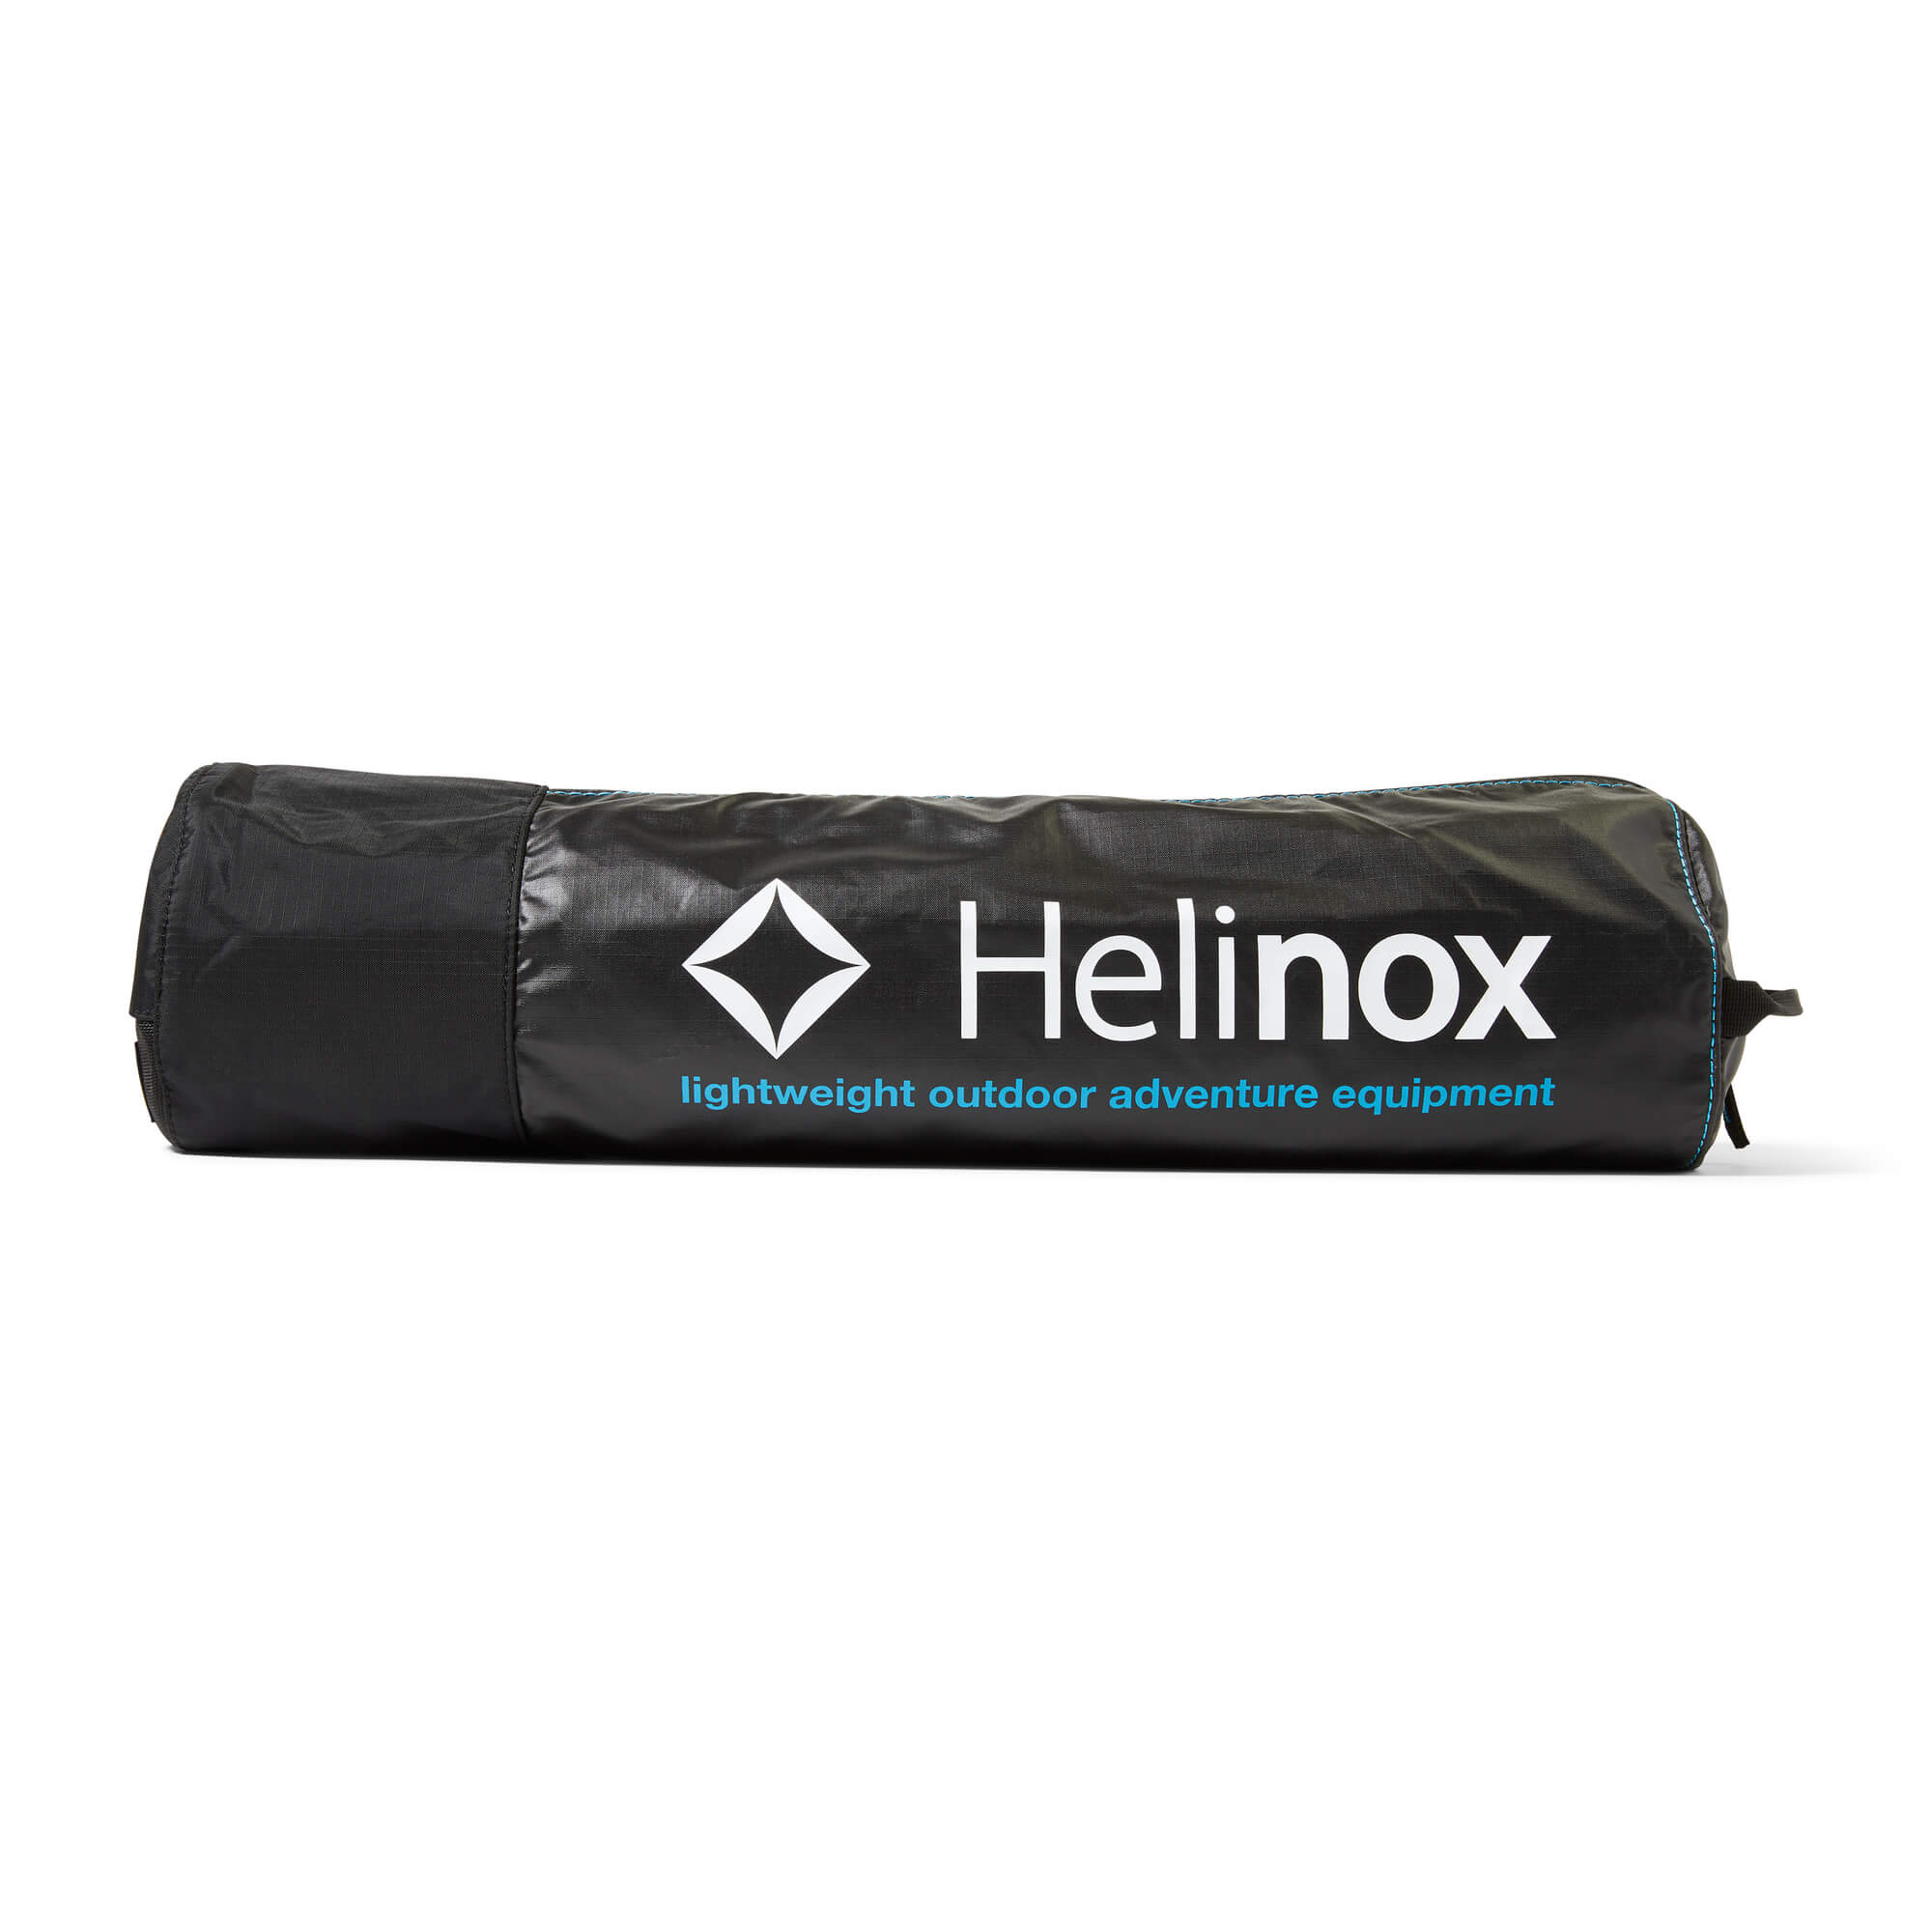 Helinox Cot One Convertible | Free Shipping & 5 Year Warranty